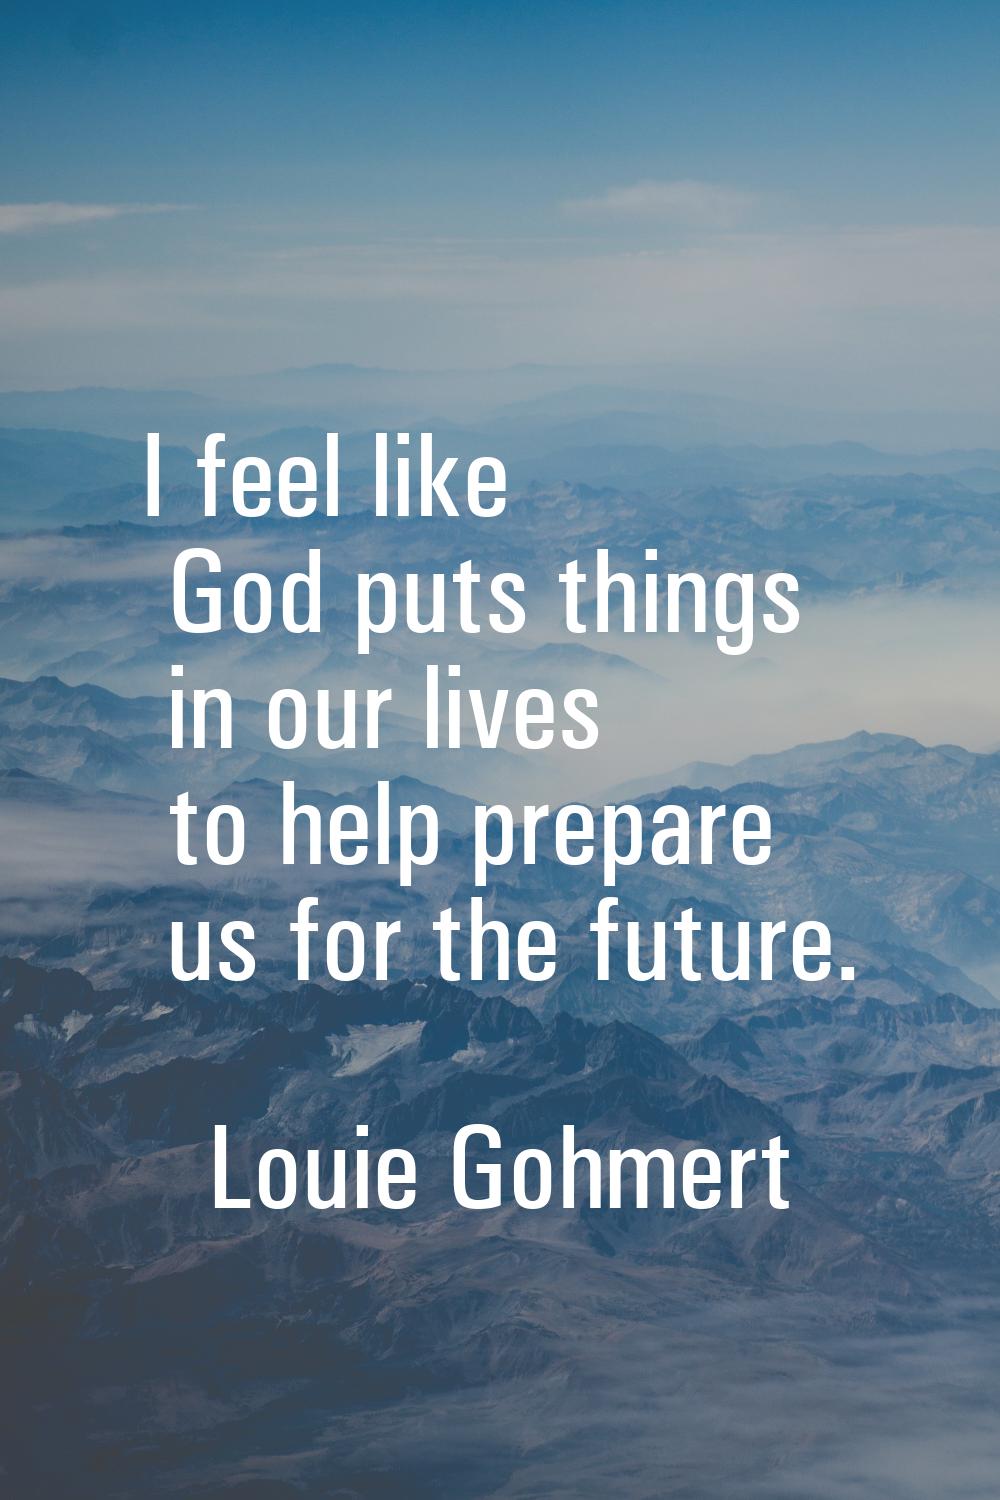 I feel like God puts things in our lives to help prepare us for the future.